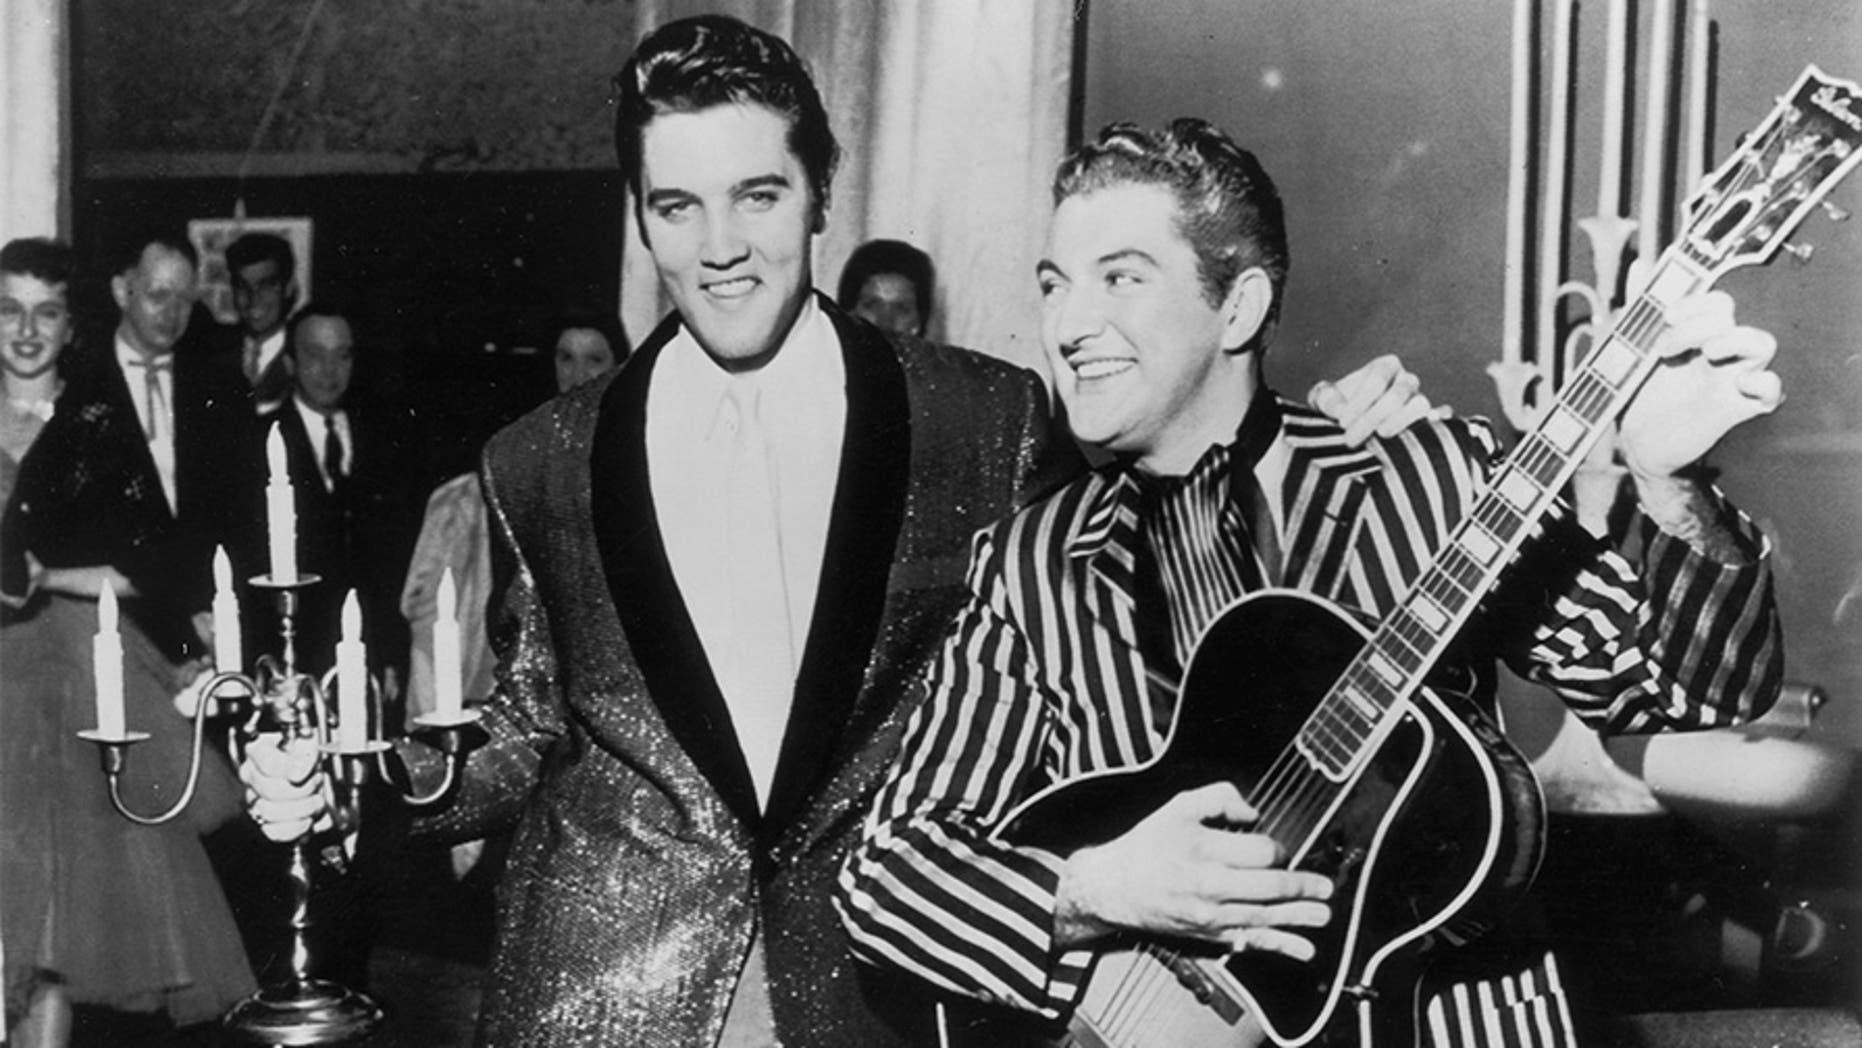 Photo of Liberace told Elvis Presley he needed ‘more glitz’ in his shows before Las Vegas transformation, book claims